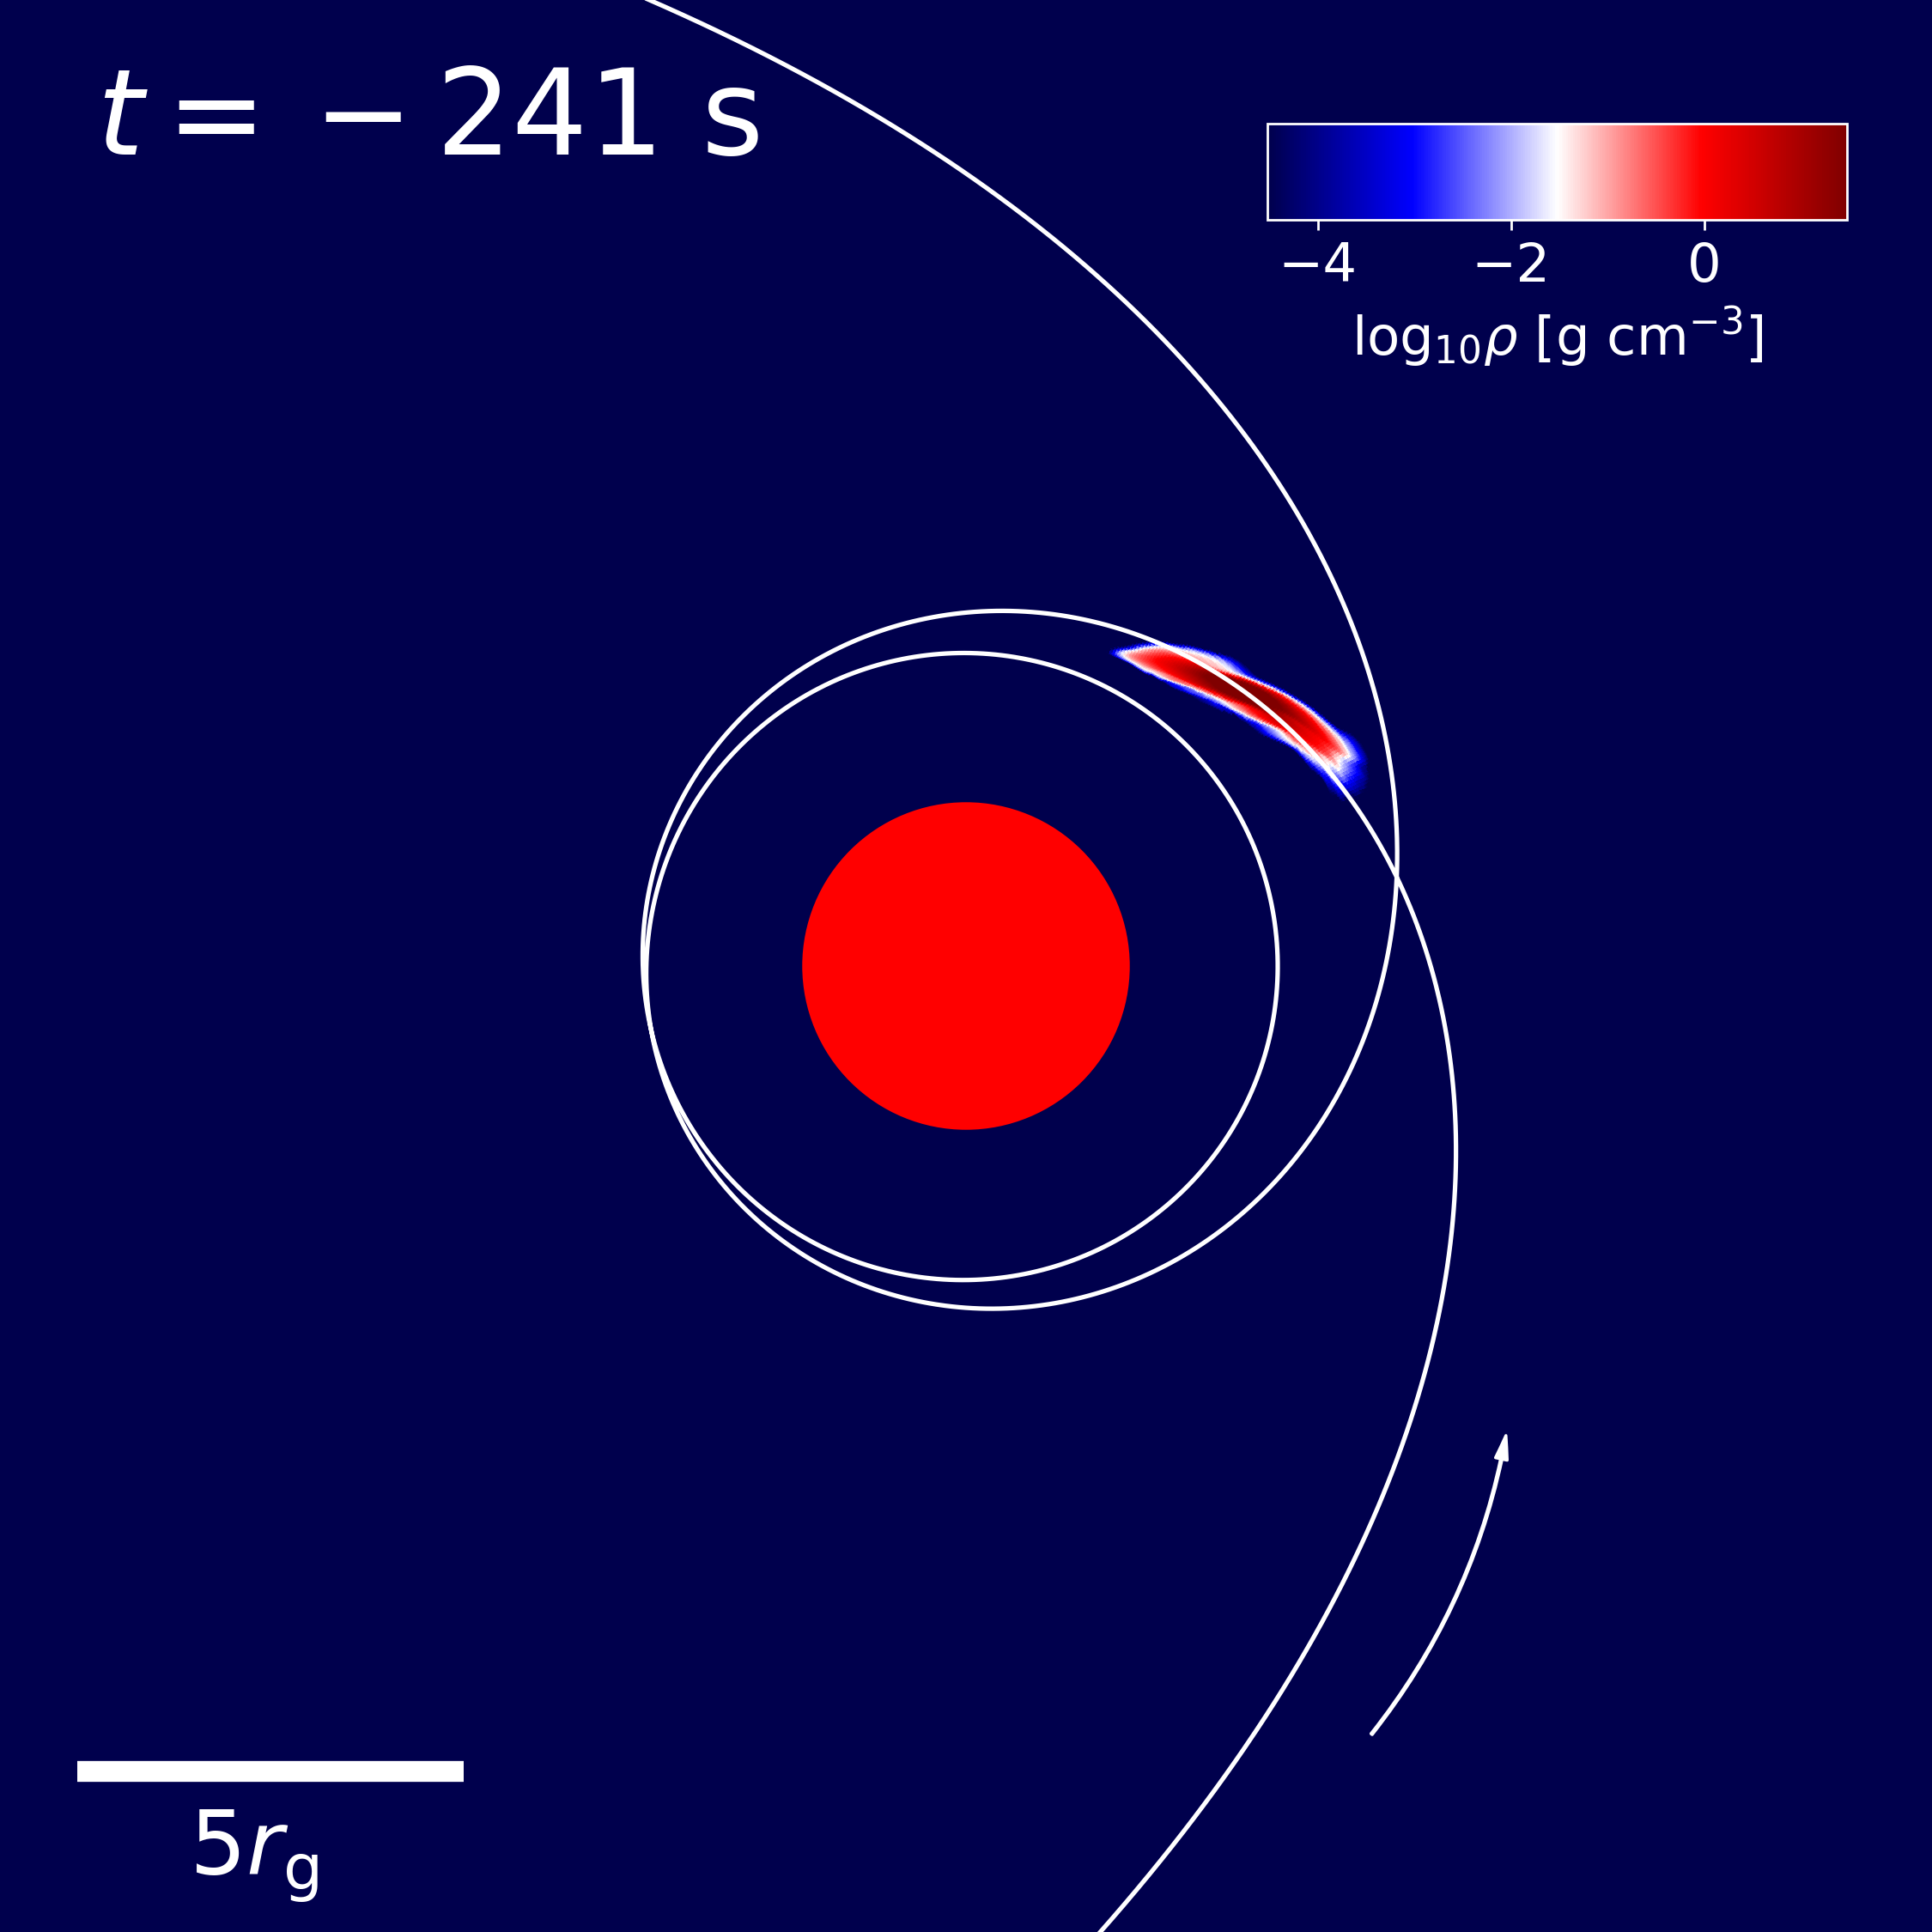 The solid white curve depicts the geodesic of an orbit with $r_{\rm p} \simeq 4.03 r_{\rm g}$ around a black hole (red disk at the center); the arrow indicates the direction of the orbit. Colorscale shows the density distribution of stellar debris 241~s before a star whose center of mass follows this geodesic passes through pericenter.